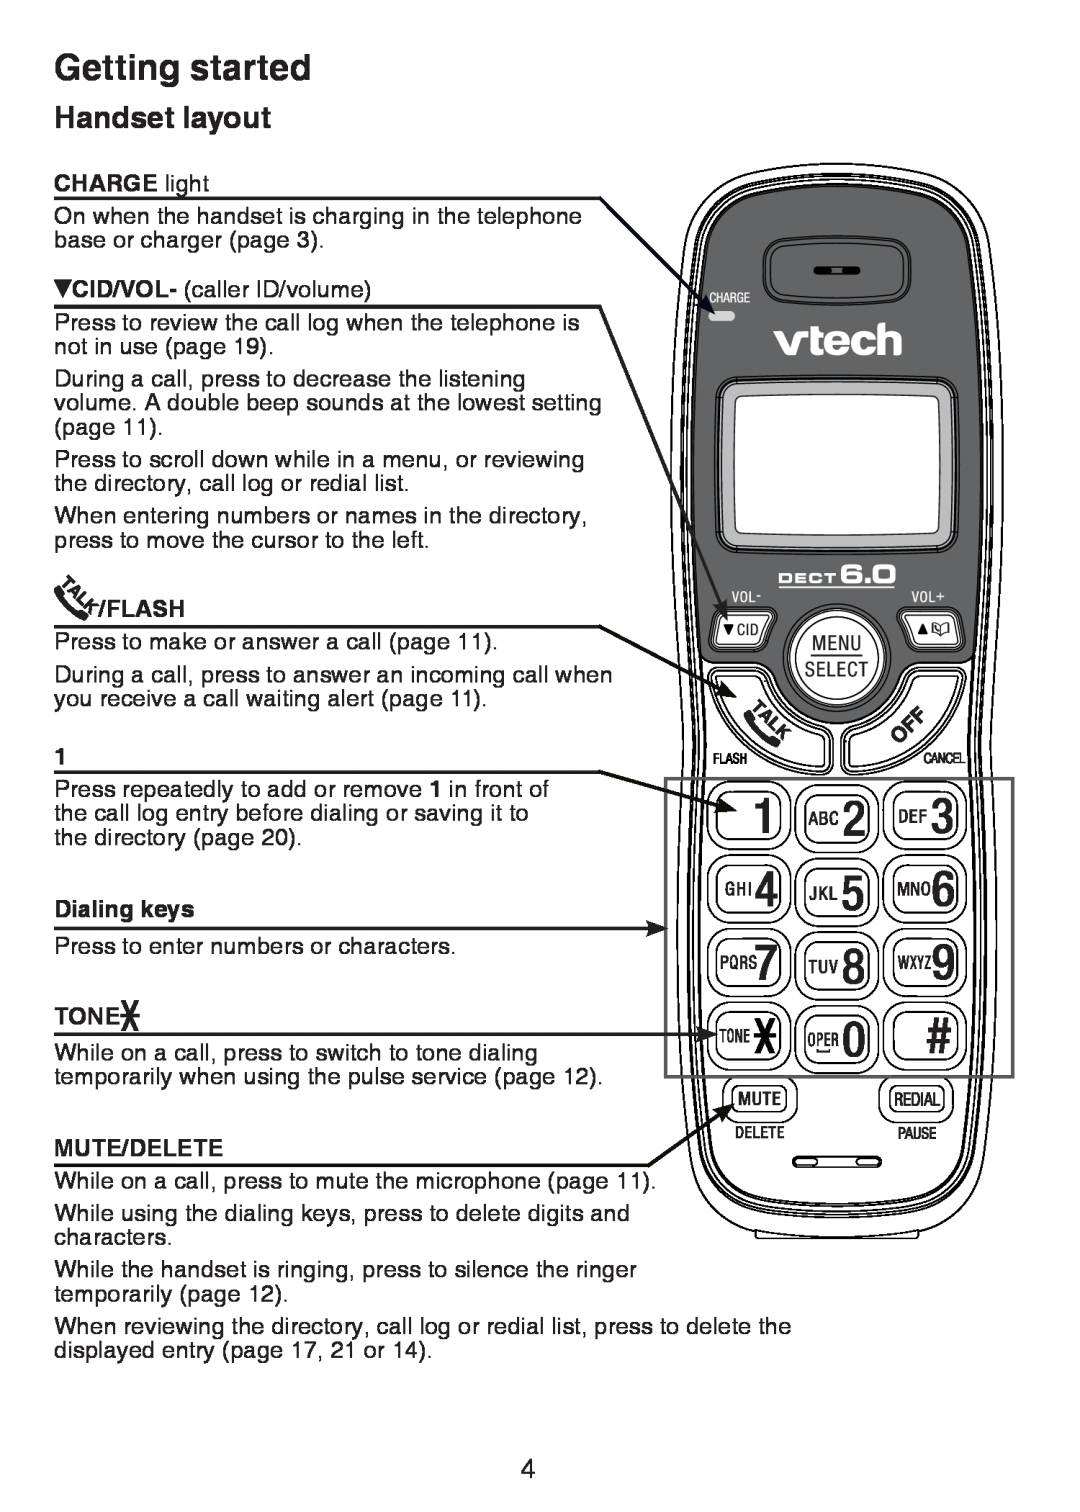 VTech CS6124-11, CS6124-21 Handset layout, Getting started, CHARGE light, Flash, Dialing keys, Tone, Mute/Delete 